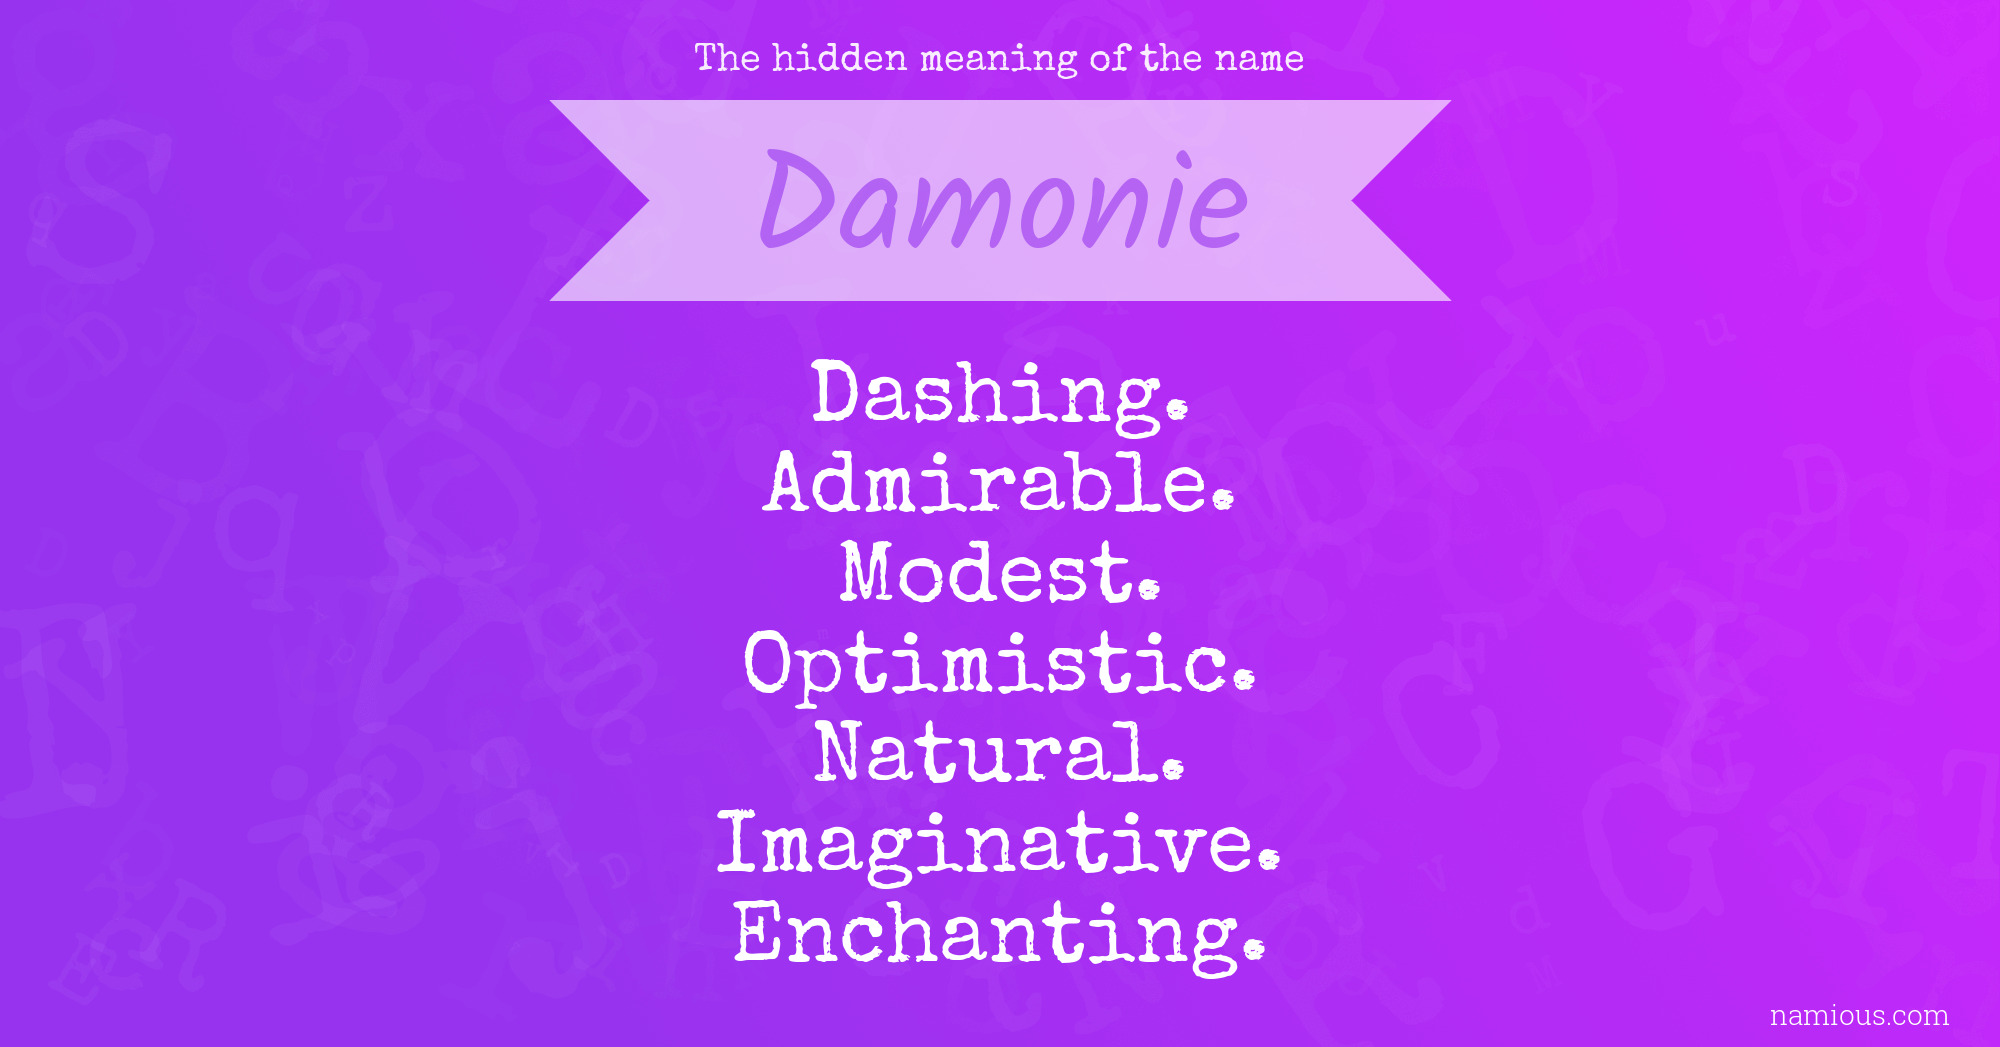 The hidden meaning of the name Damonie